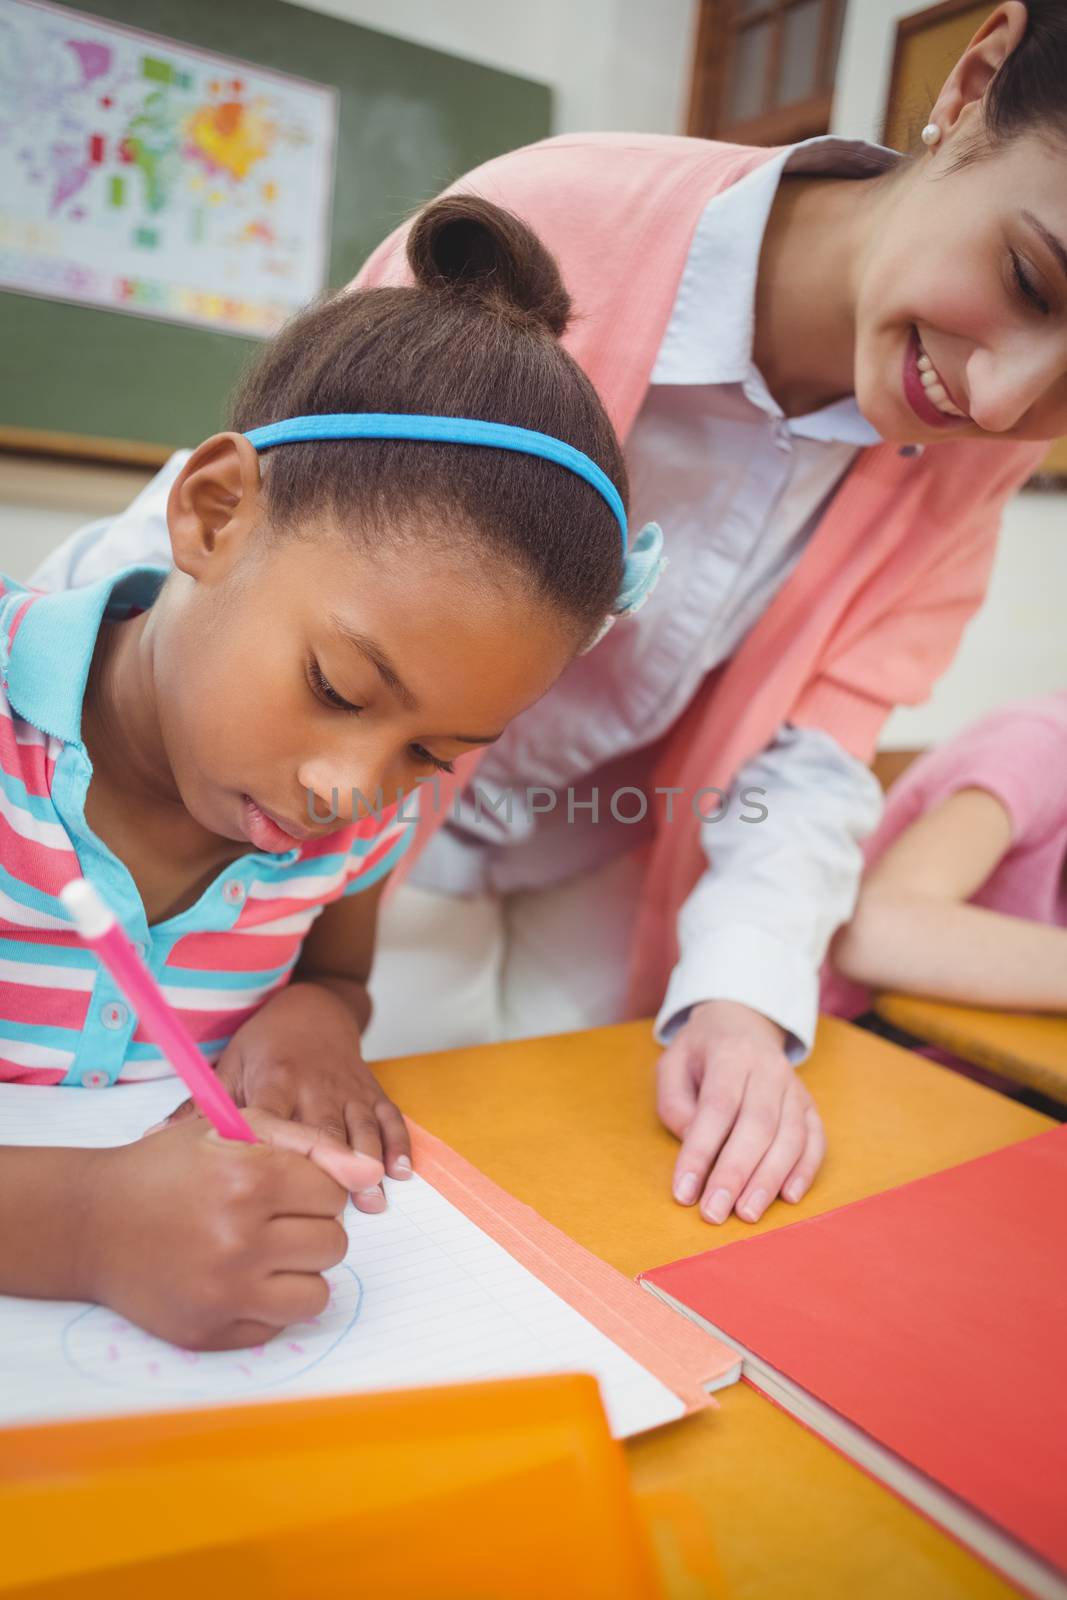 Pupil and teacher at desk in classroom at the elementary school